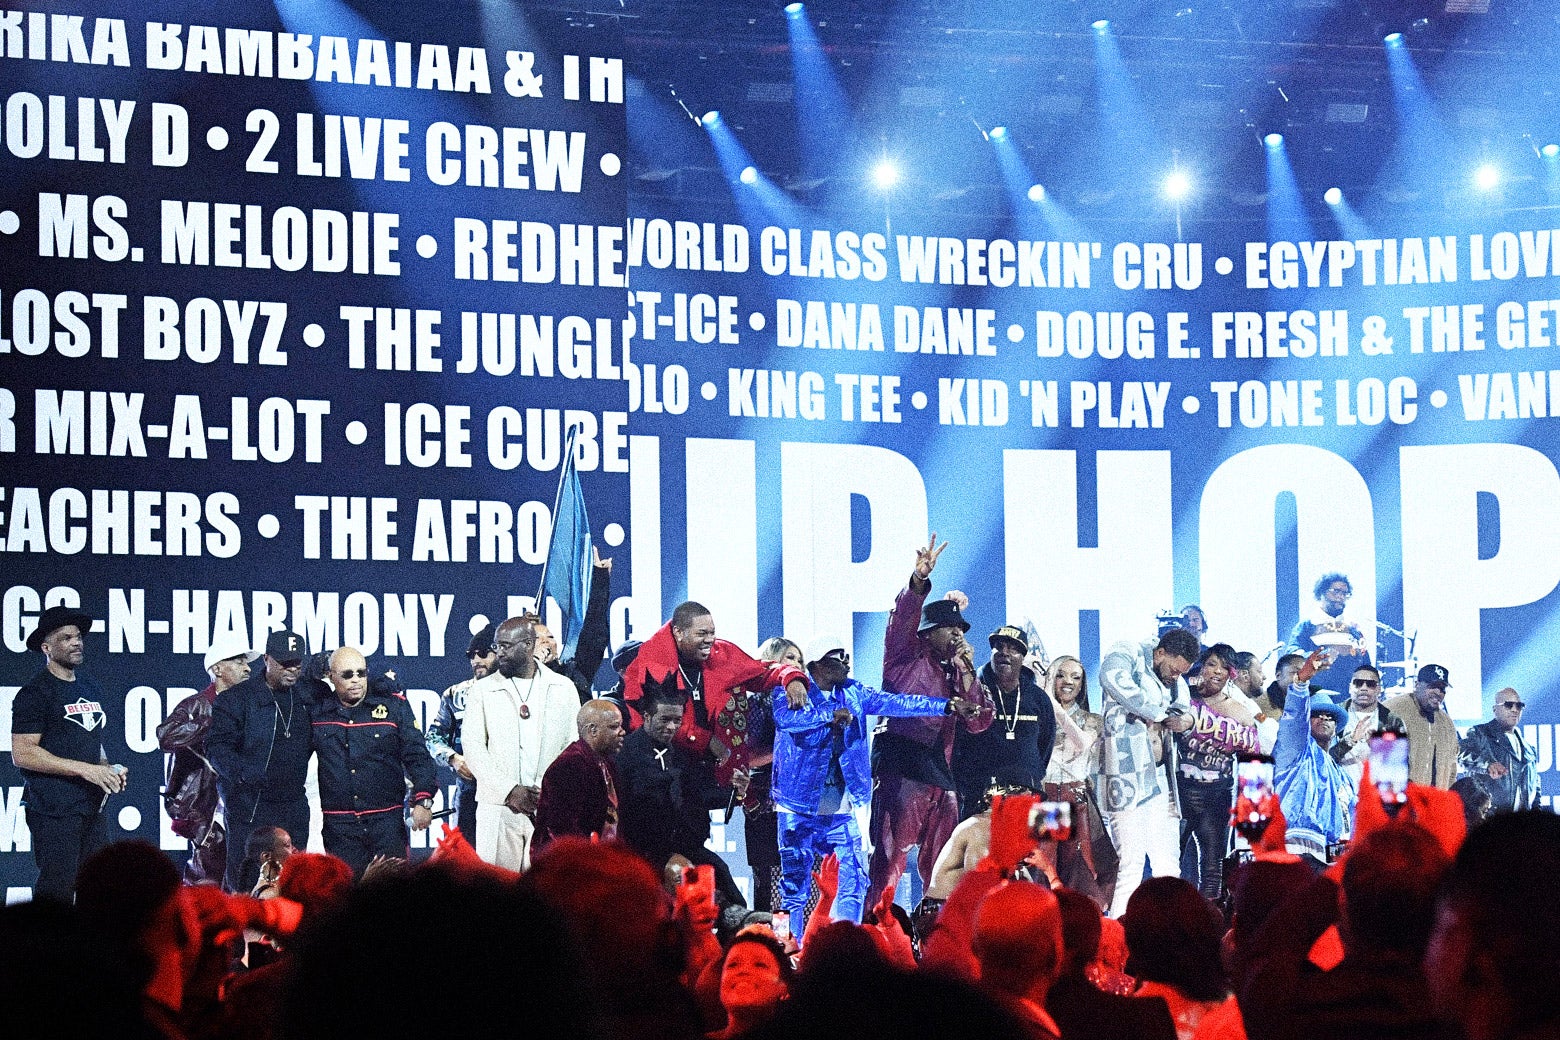 A group of 15 to 20 rappers perform onstage, with the names of hip-hop legends in the background.